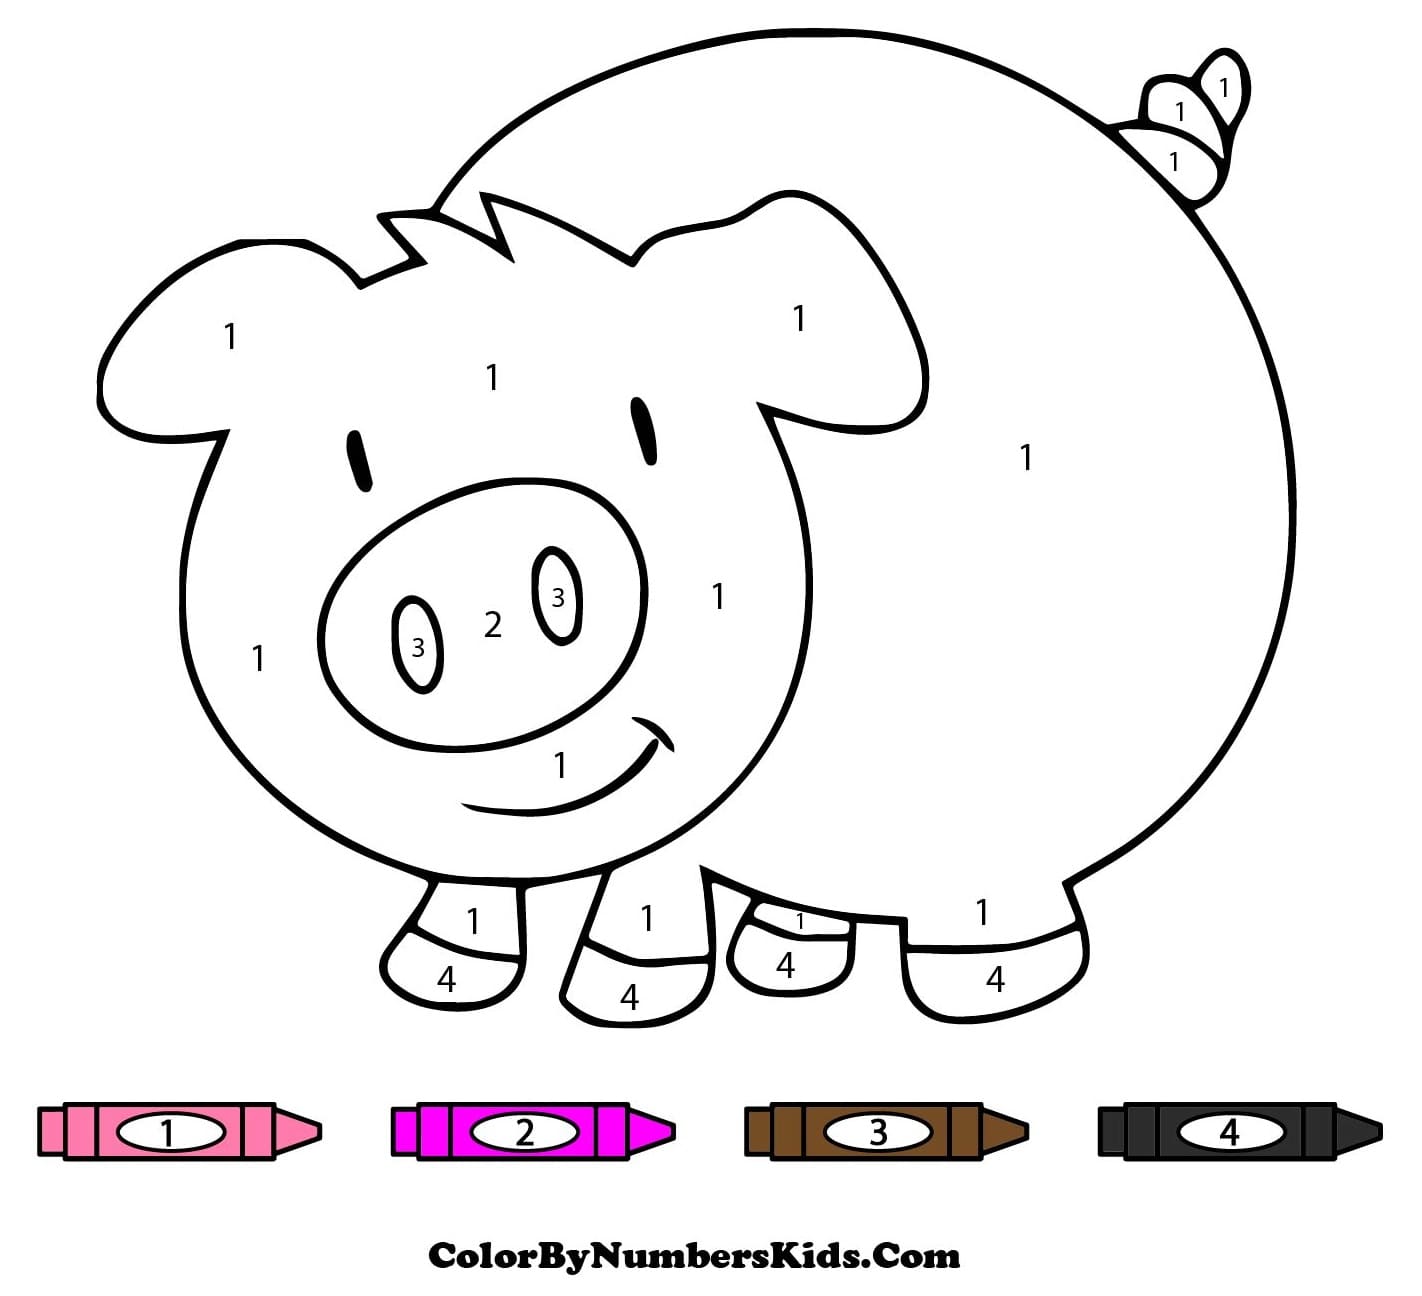 Fat Pig Color By Number